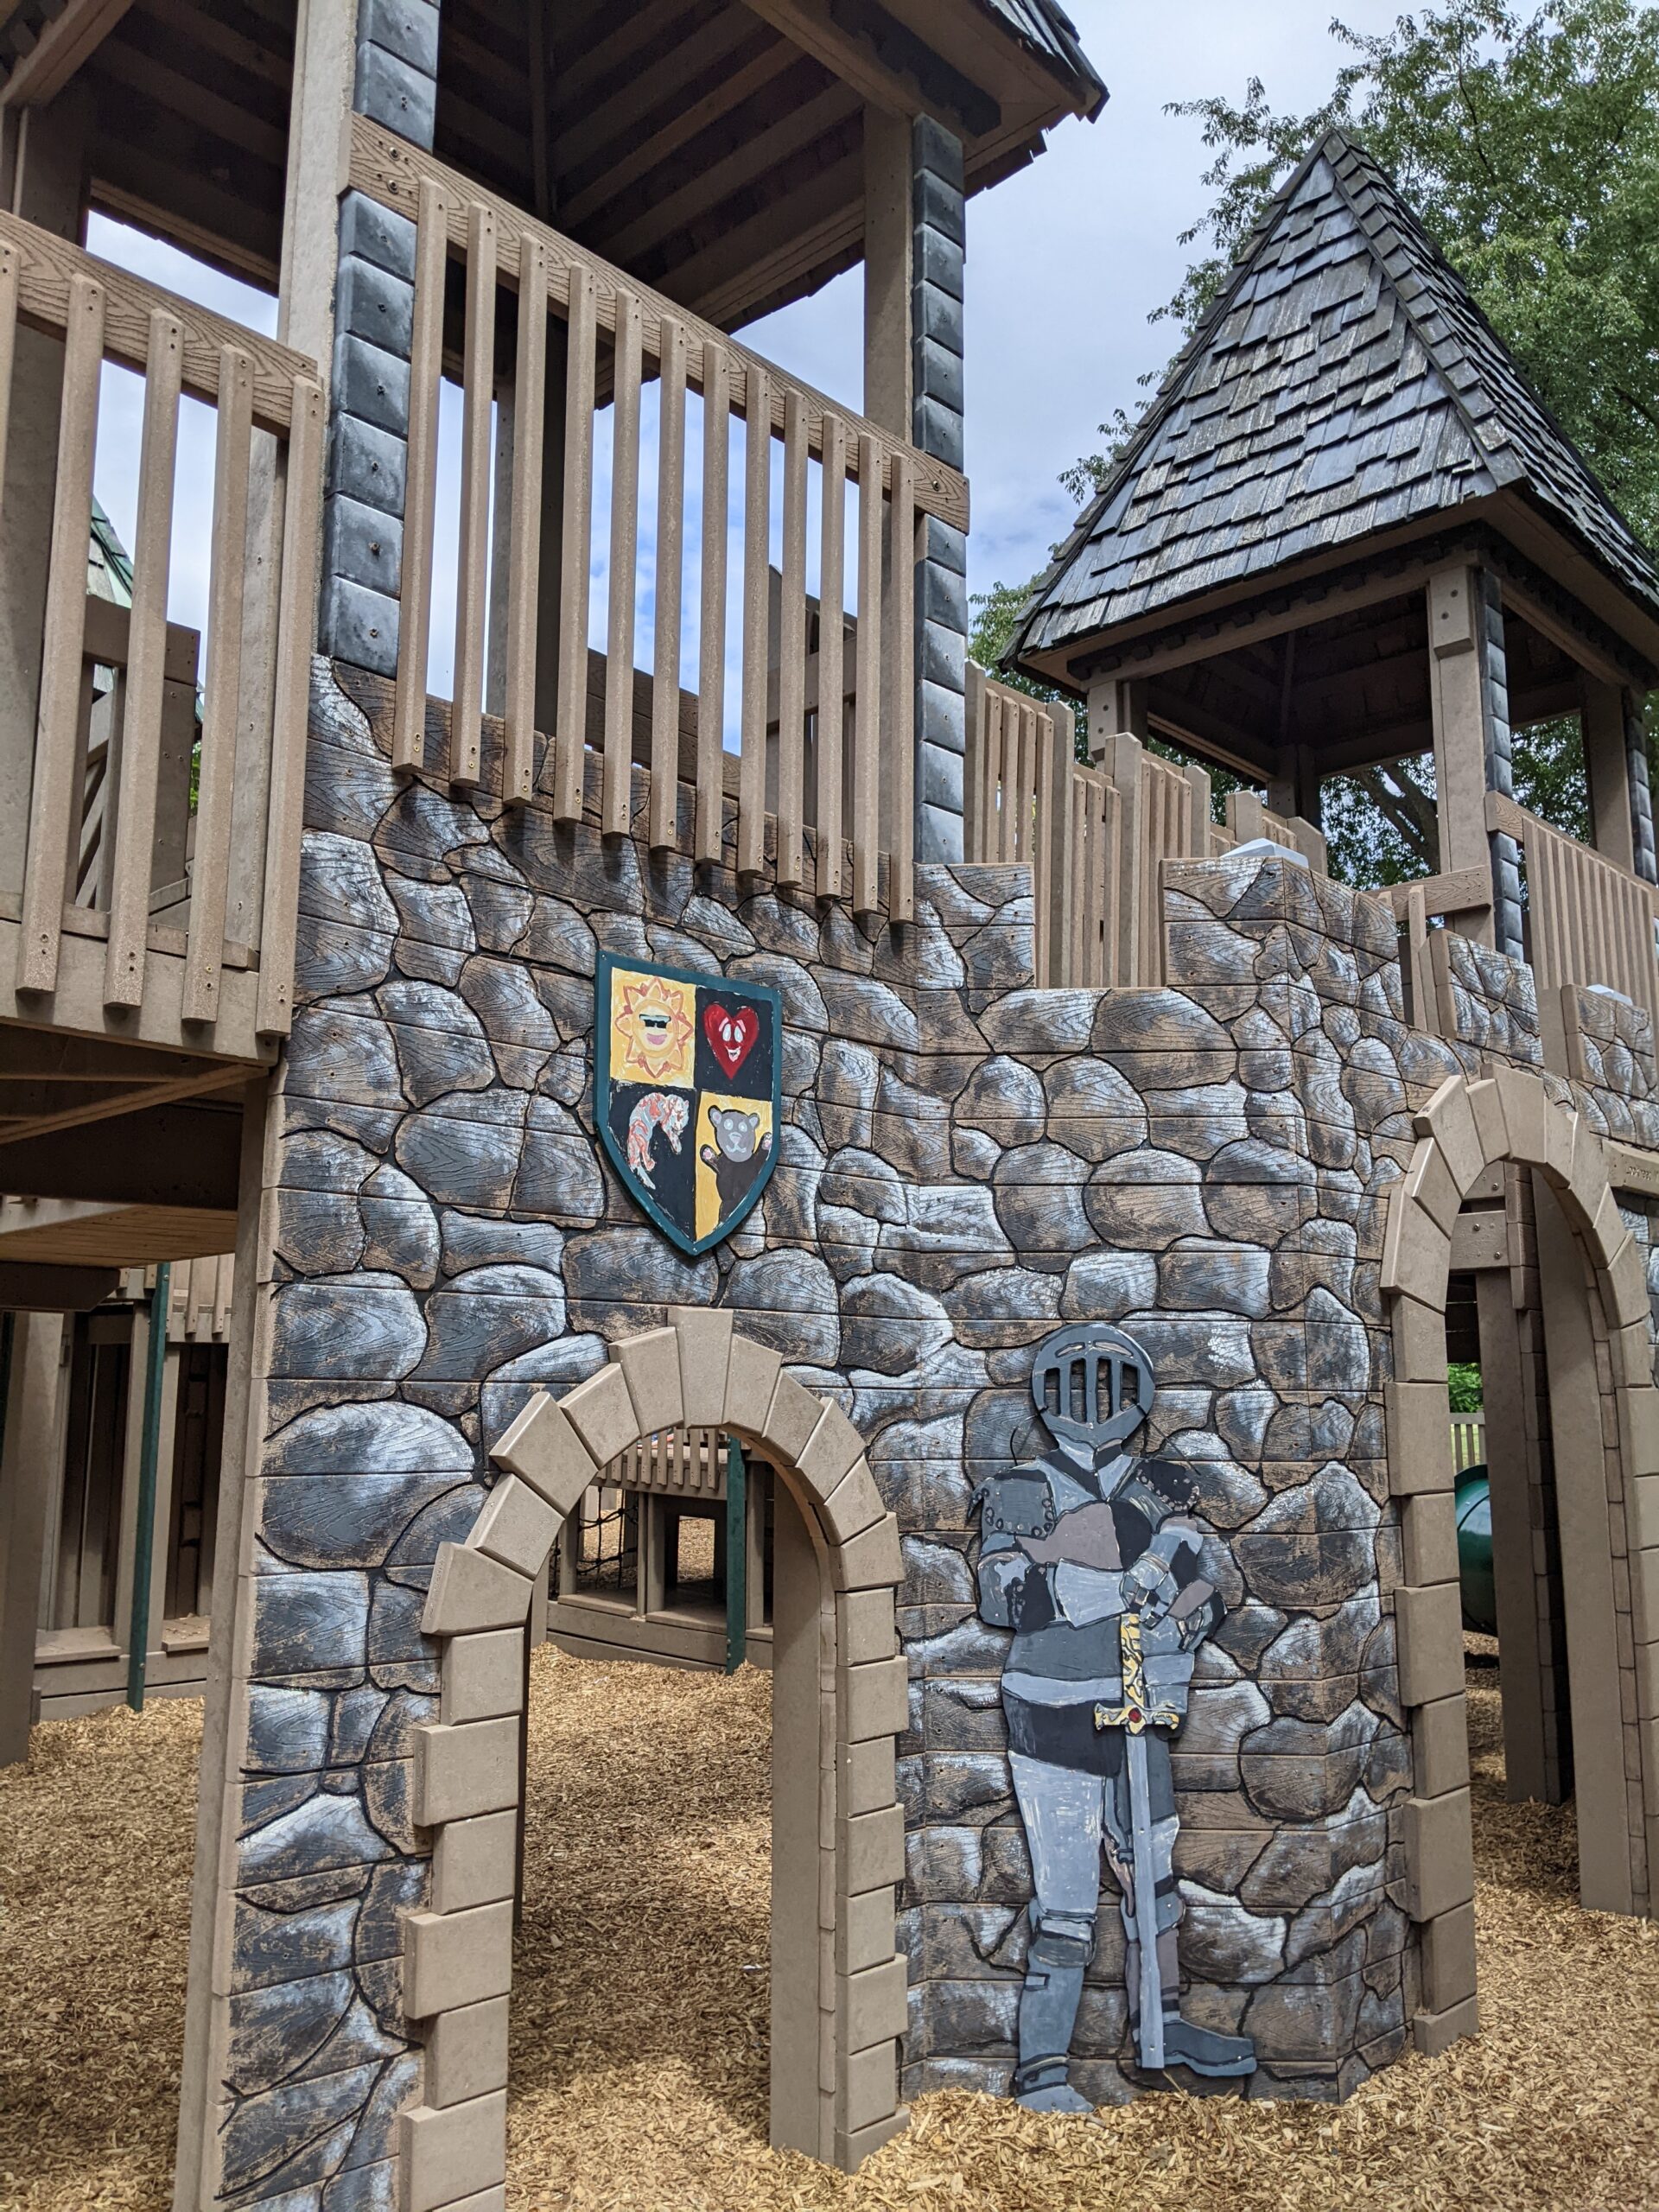 Frank Fullerton Memorial Park Playground in Moorestown NJ - FEATURES - Castle archways and Decor